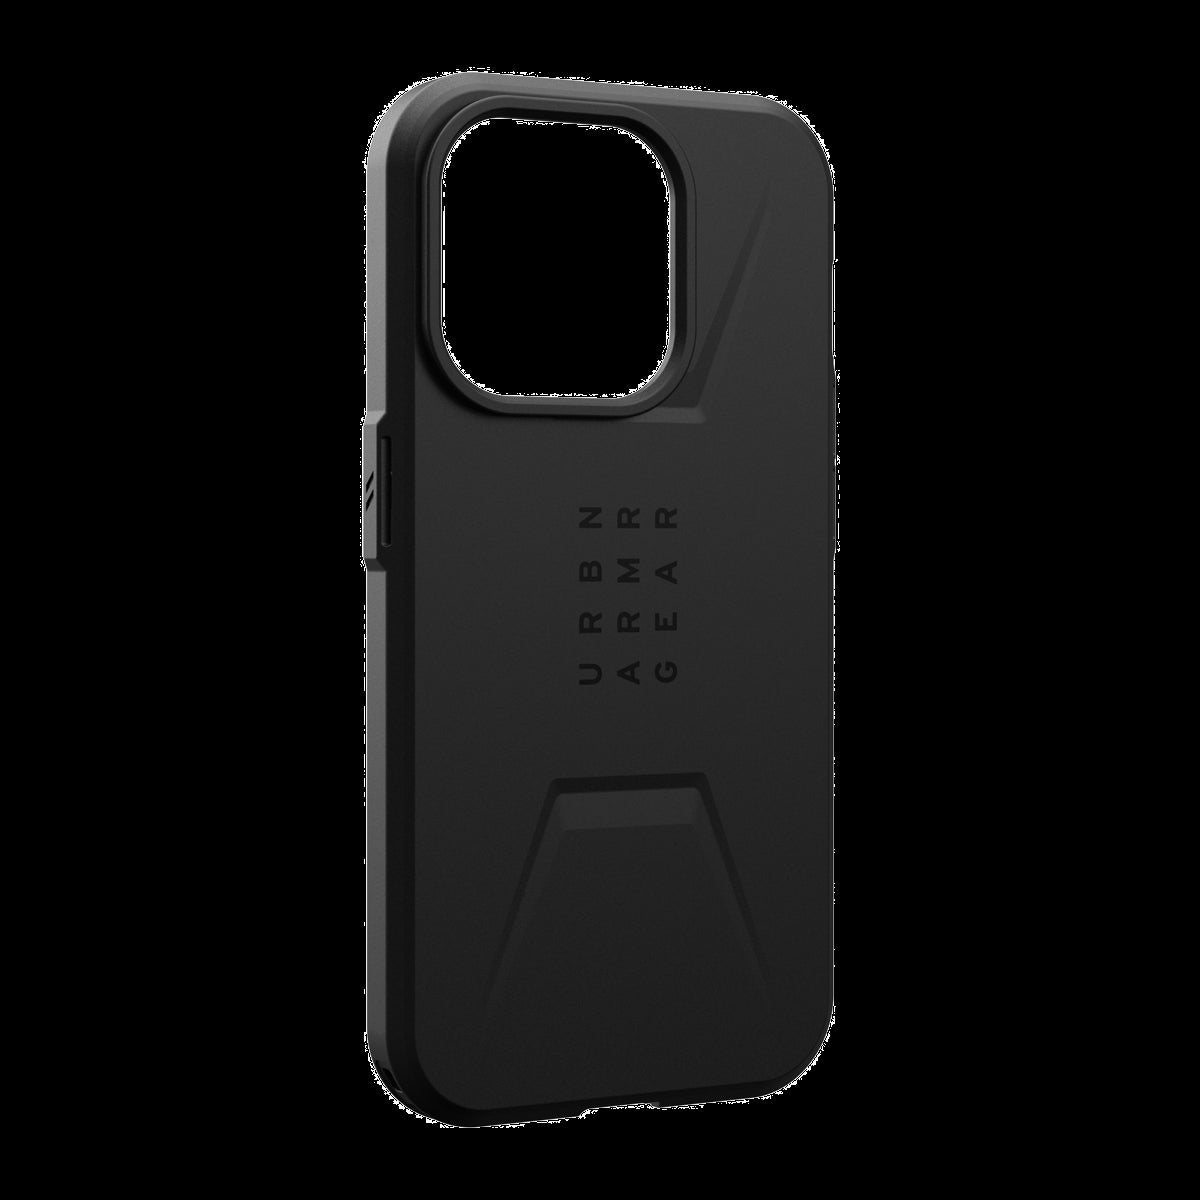 The modern yet rugged UAG Civilian case features shock absorbing construction in a lightweight design that is compatible with MagSafe charging.